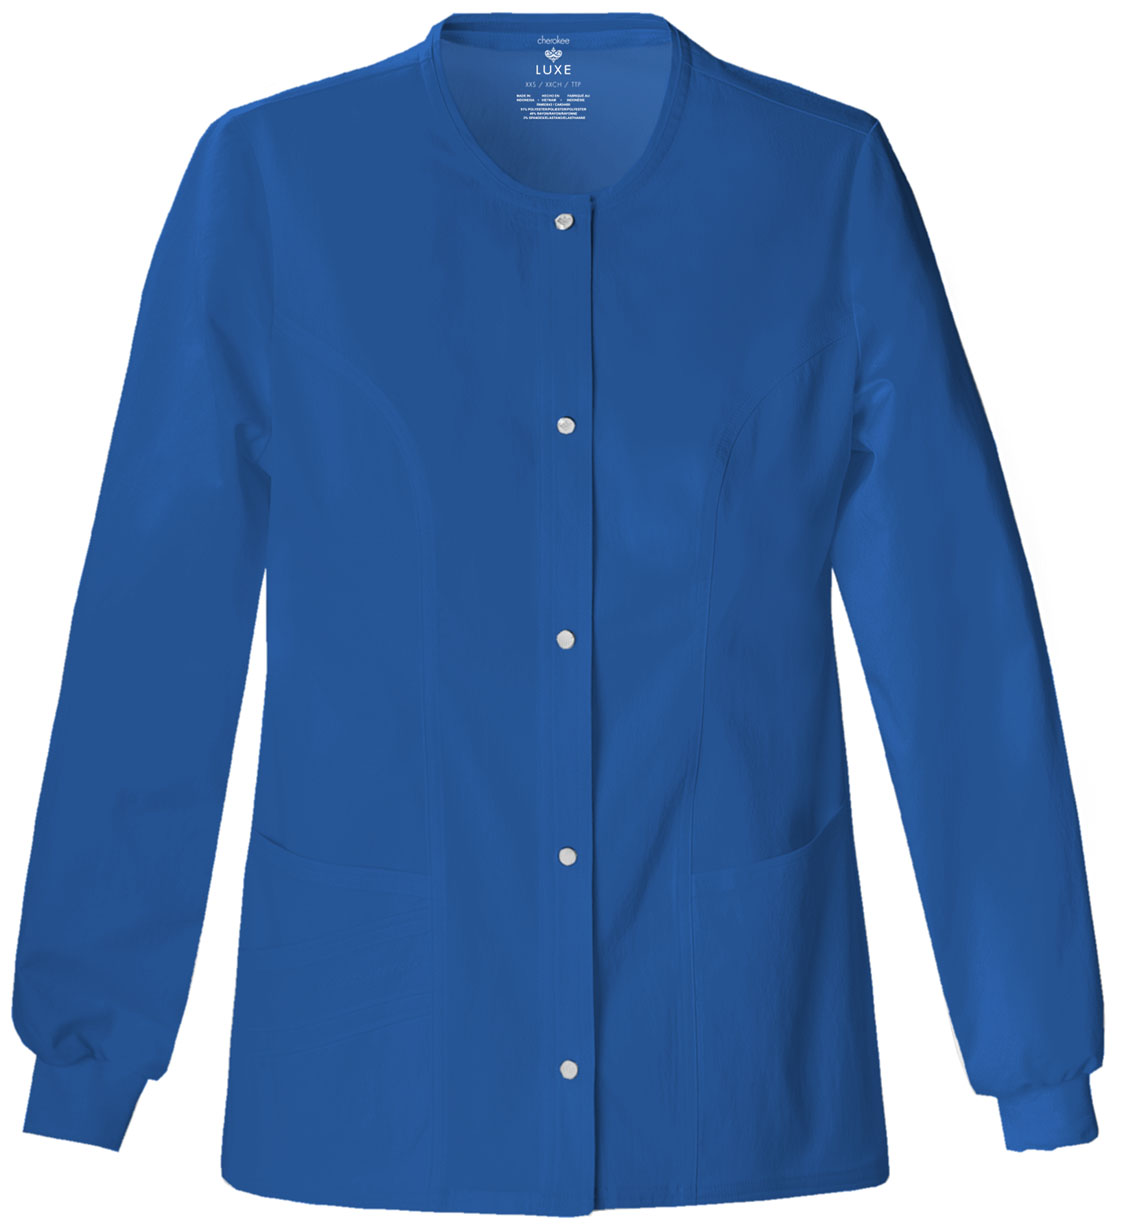 Snap Front Jacket-